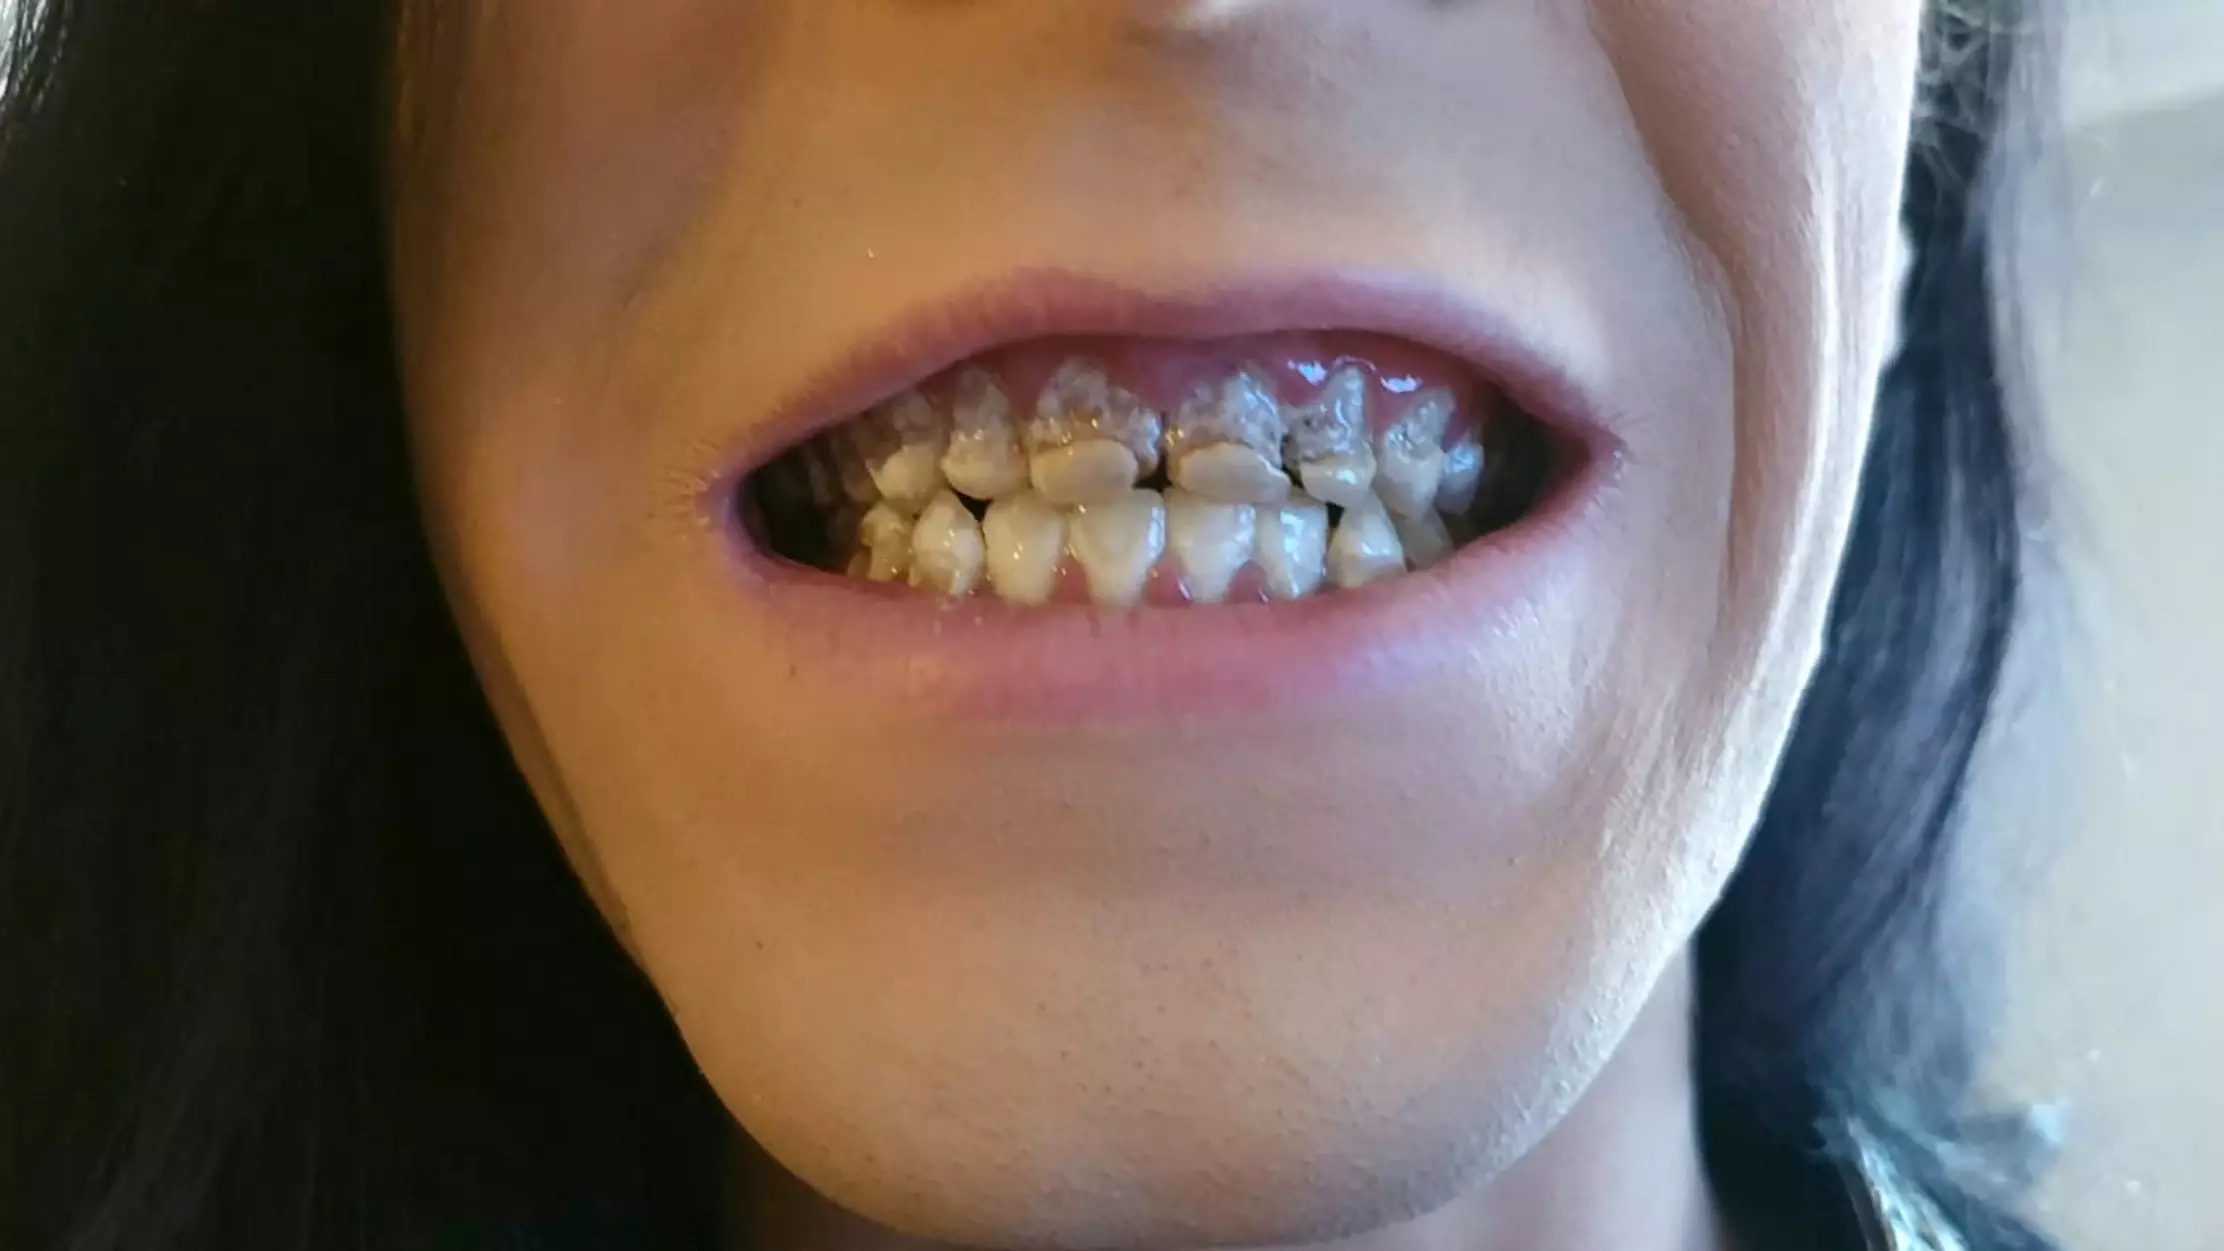 This Is The Damage Six Cans Of Energy Drink A Day Can Do To Your Teeth